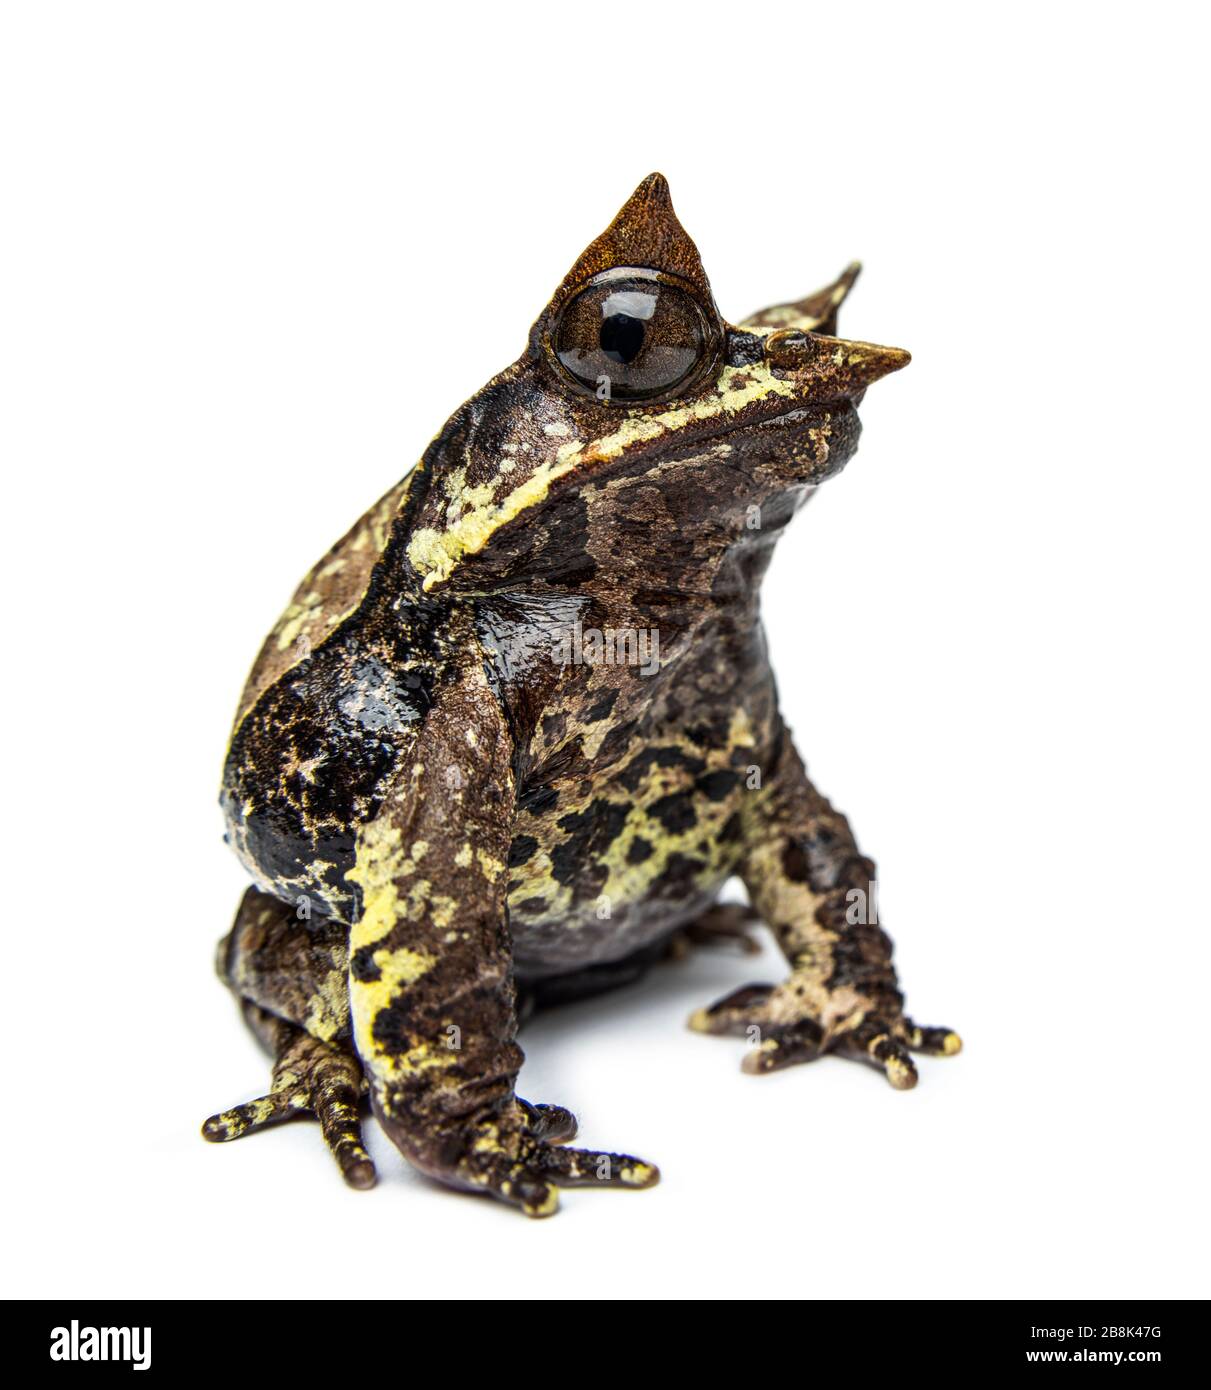 Side view of a Long-nosed horned frog looking at the camera, Megophrys nasuta, isolated Stock Photo